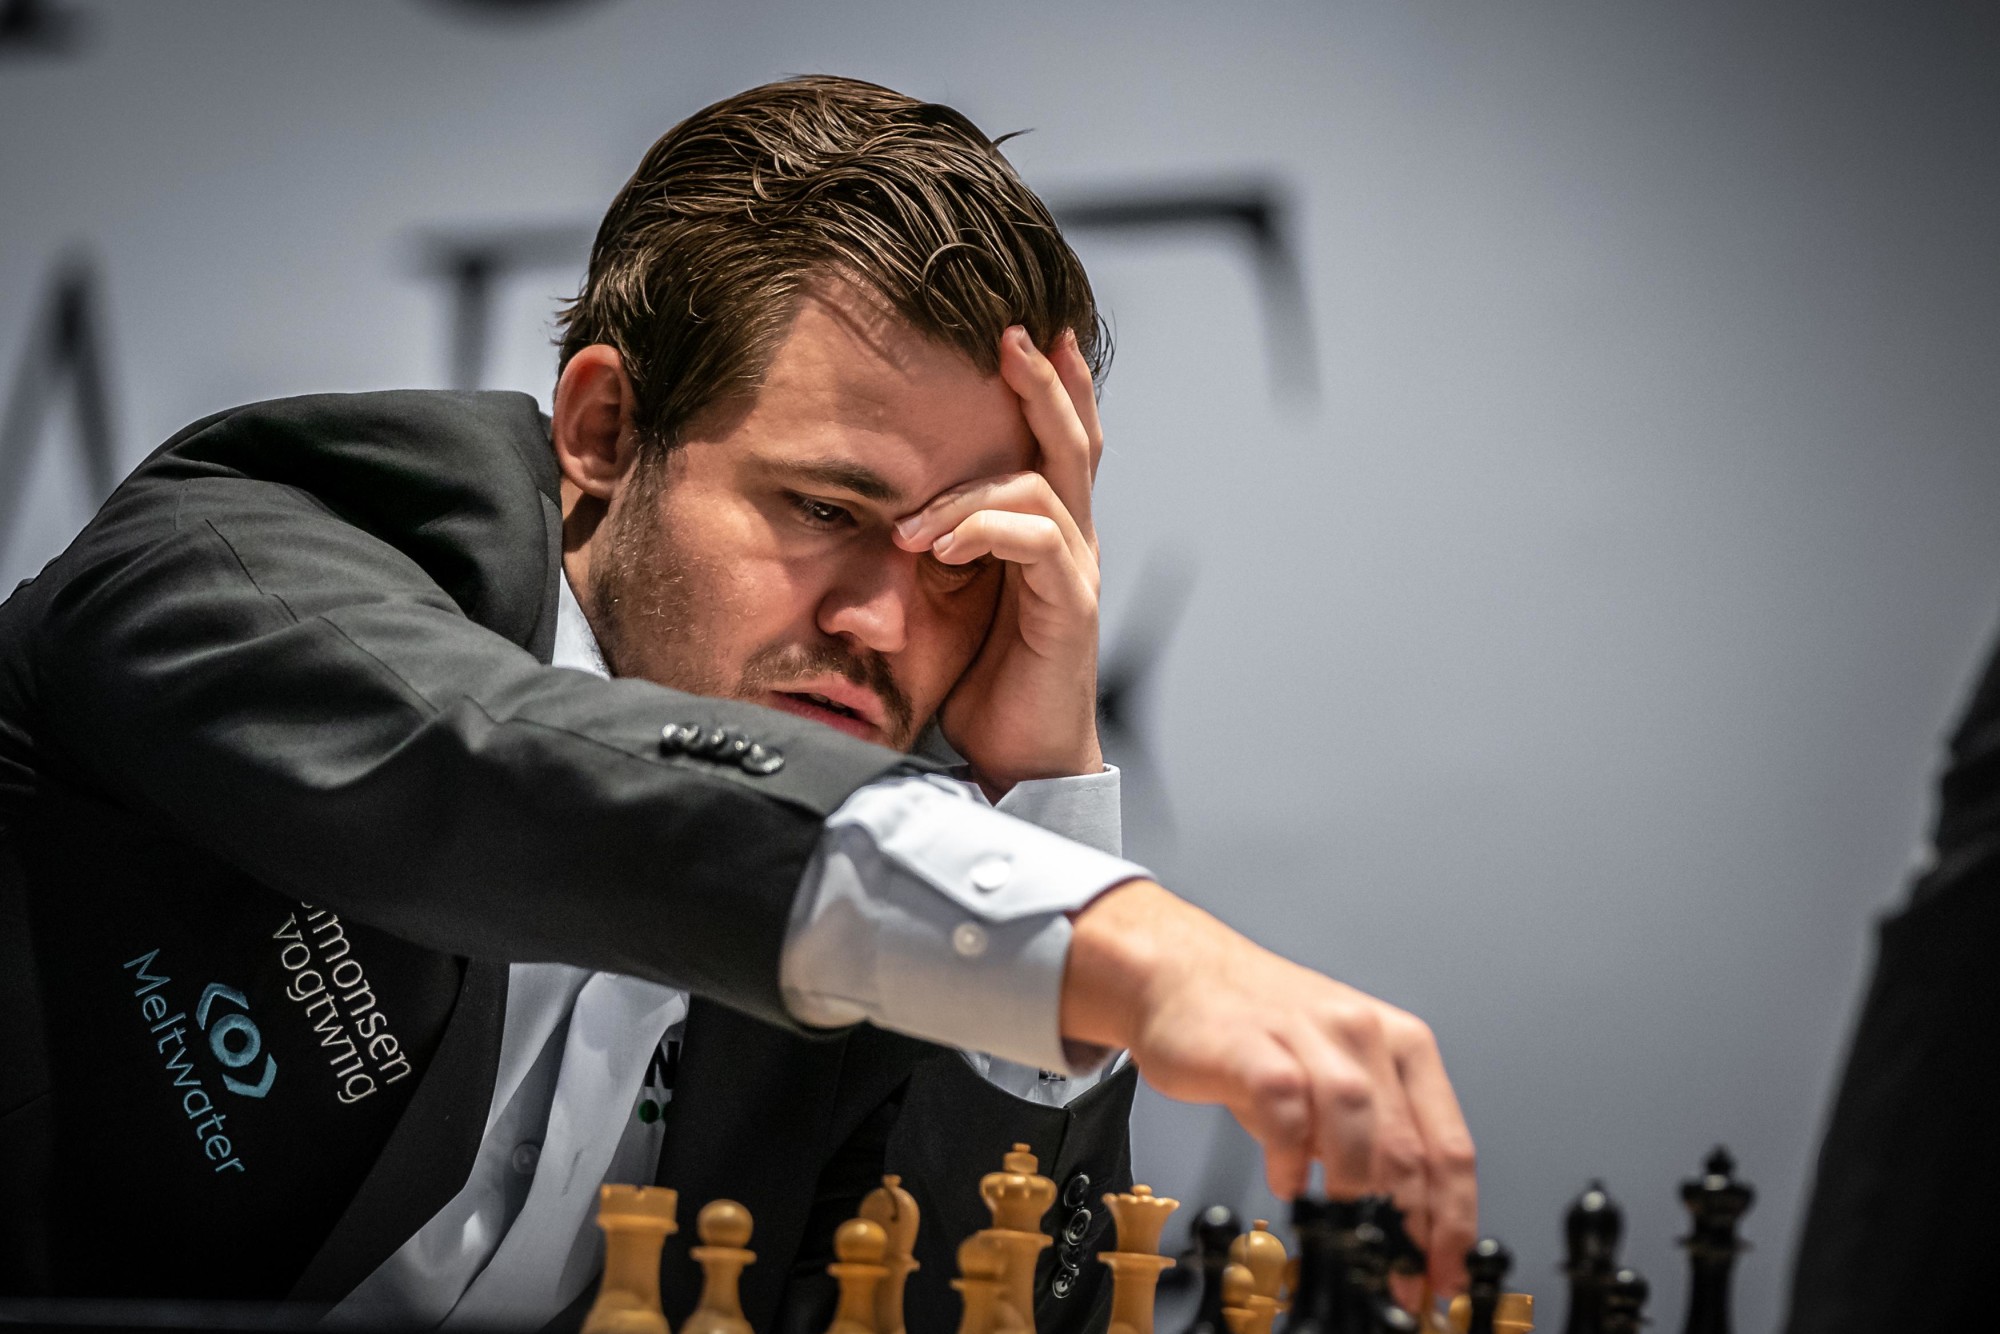 The reigning - FIDE - International Chess Federation